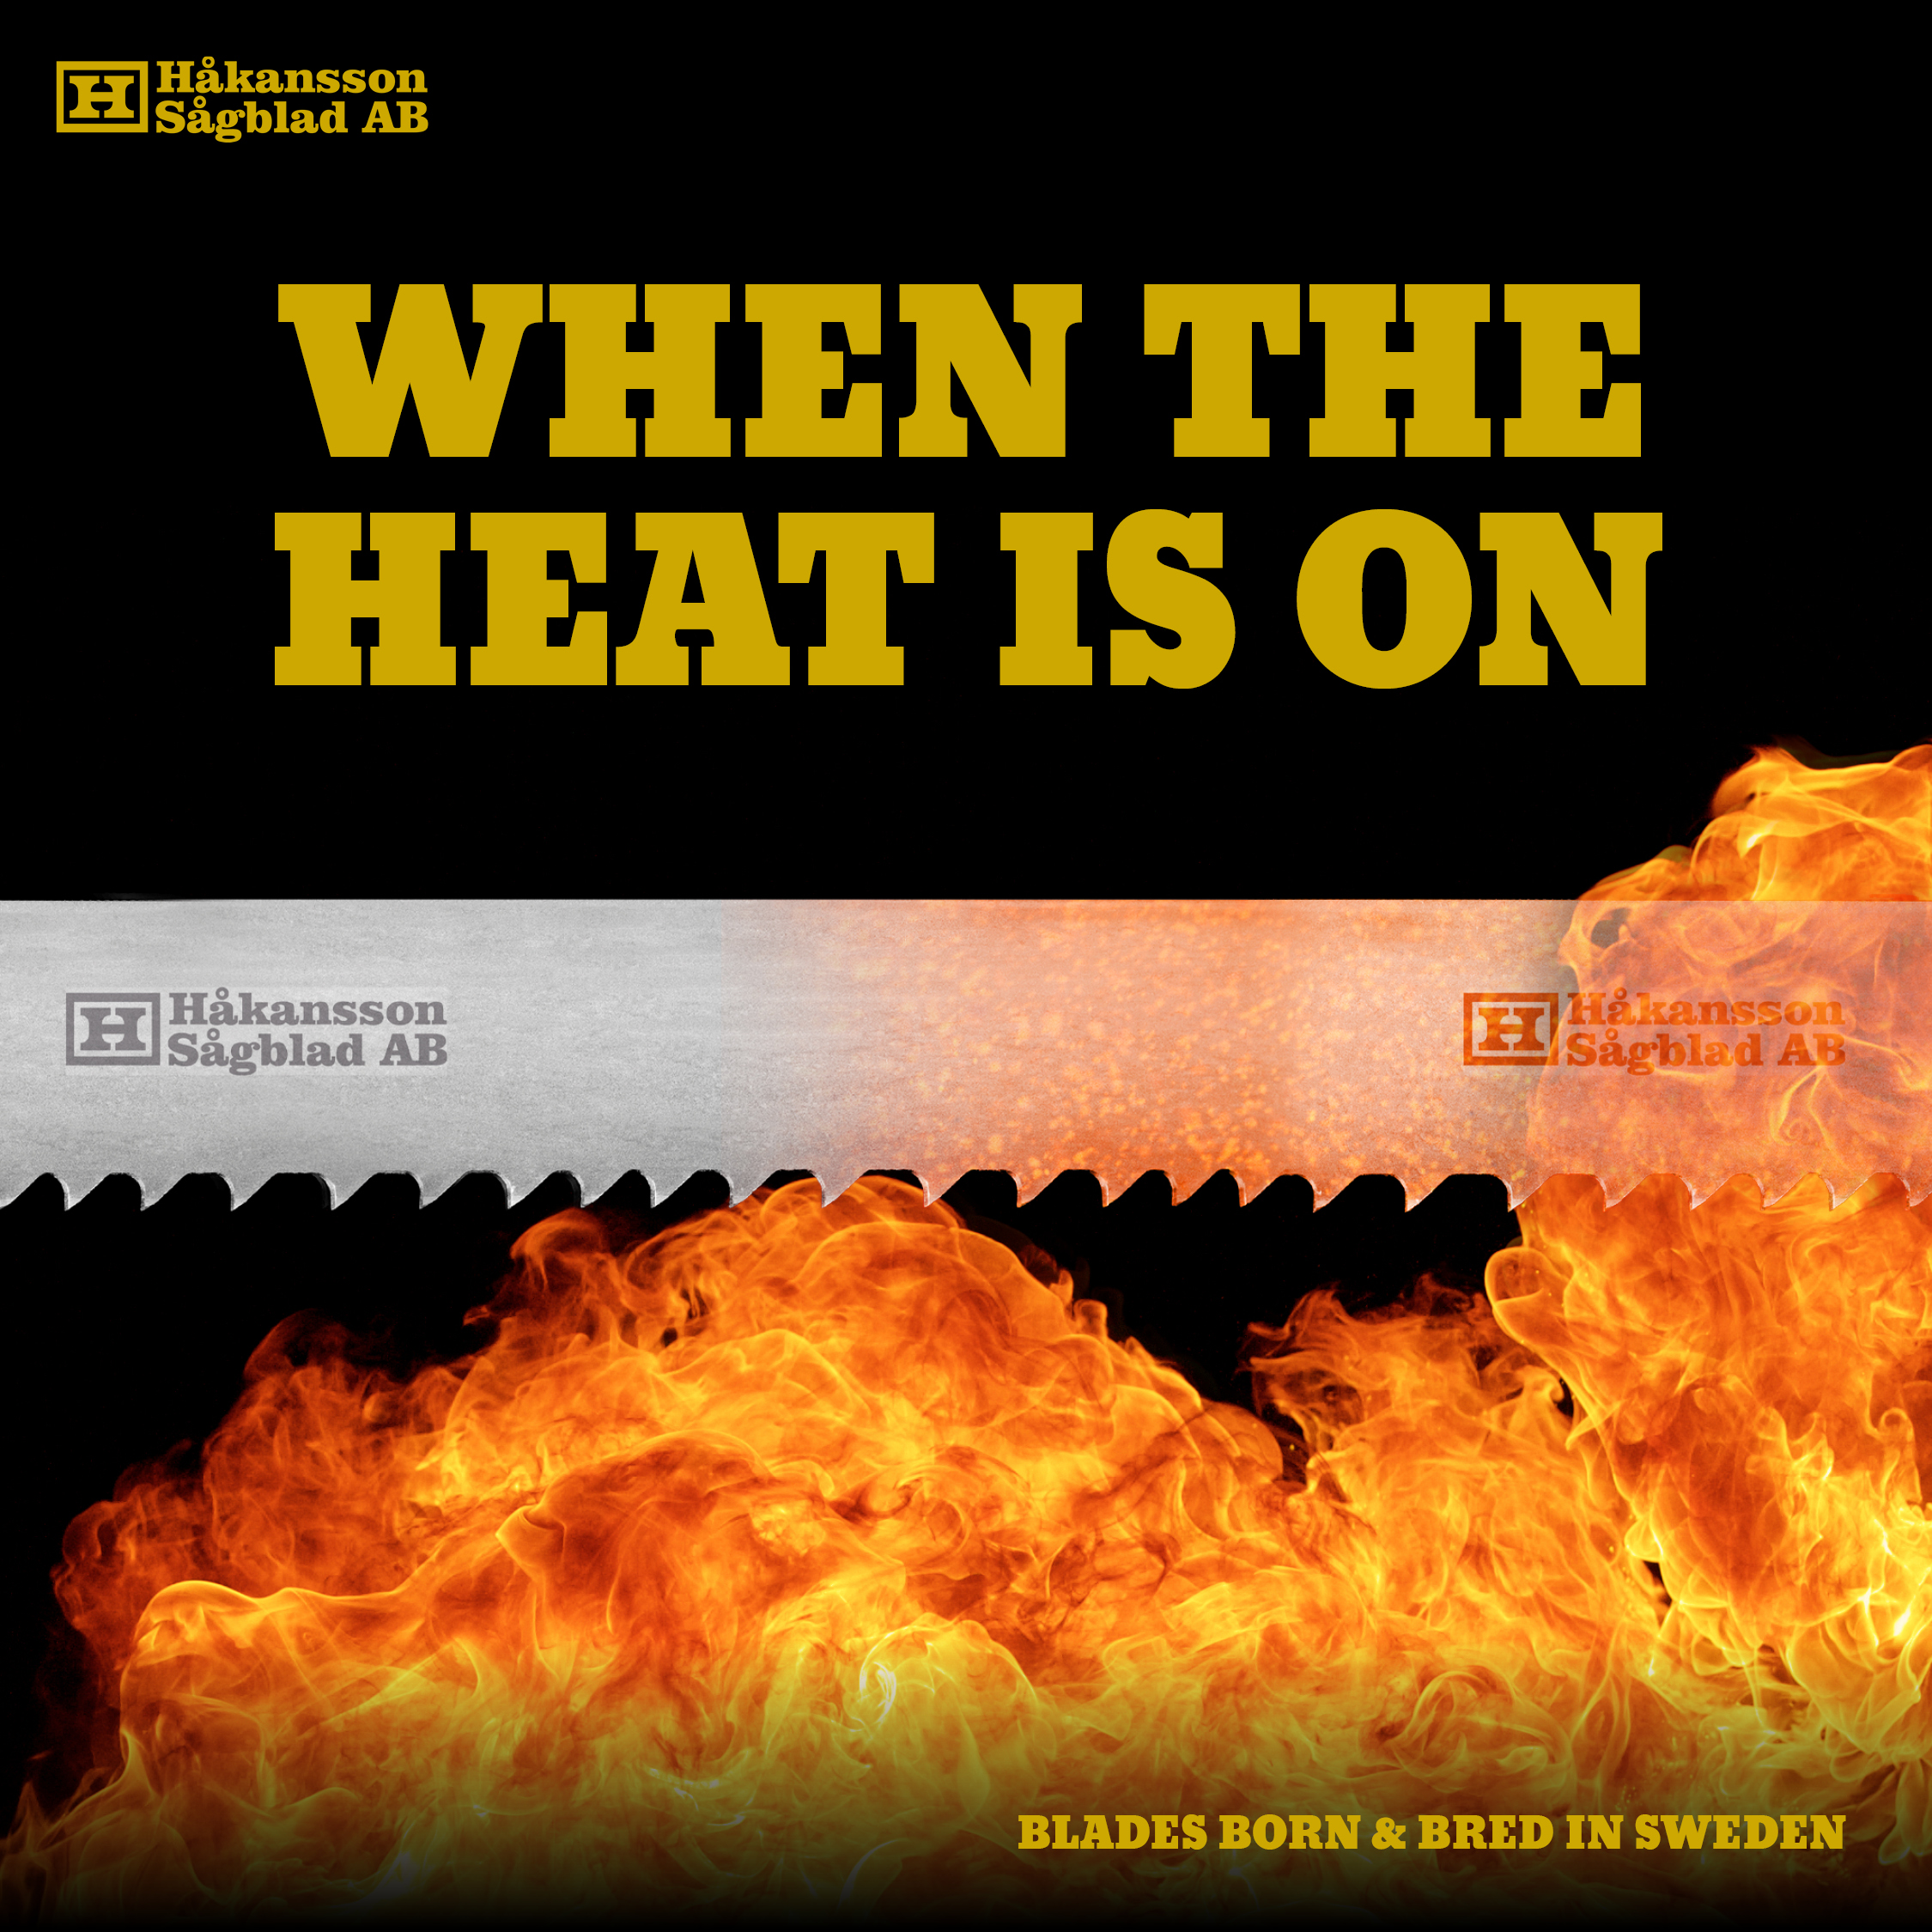 Advert WHEN THE HEAT IS ON sawblade in flames